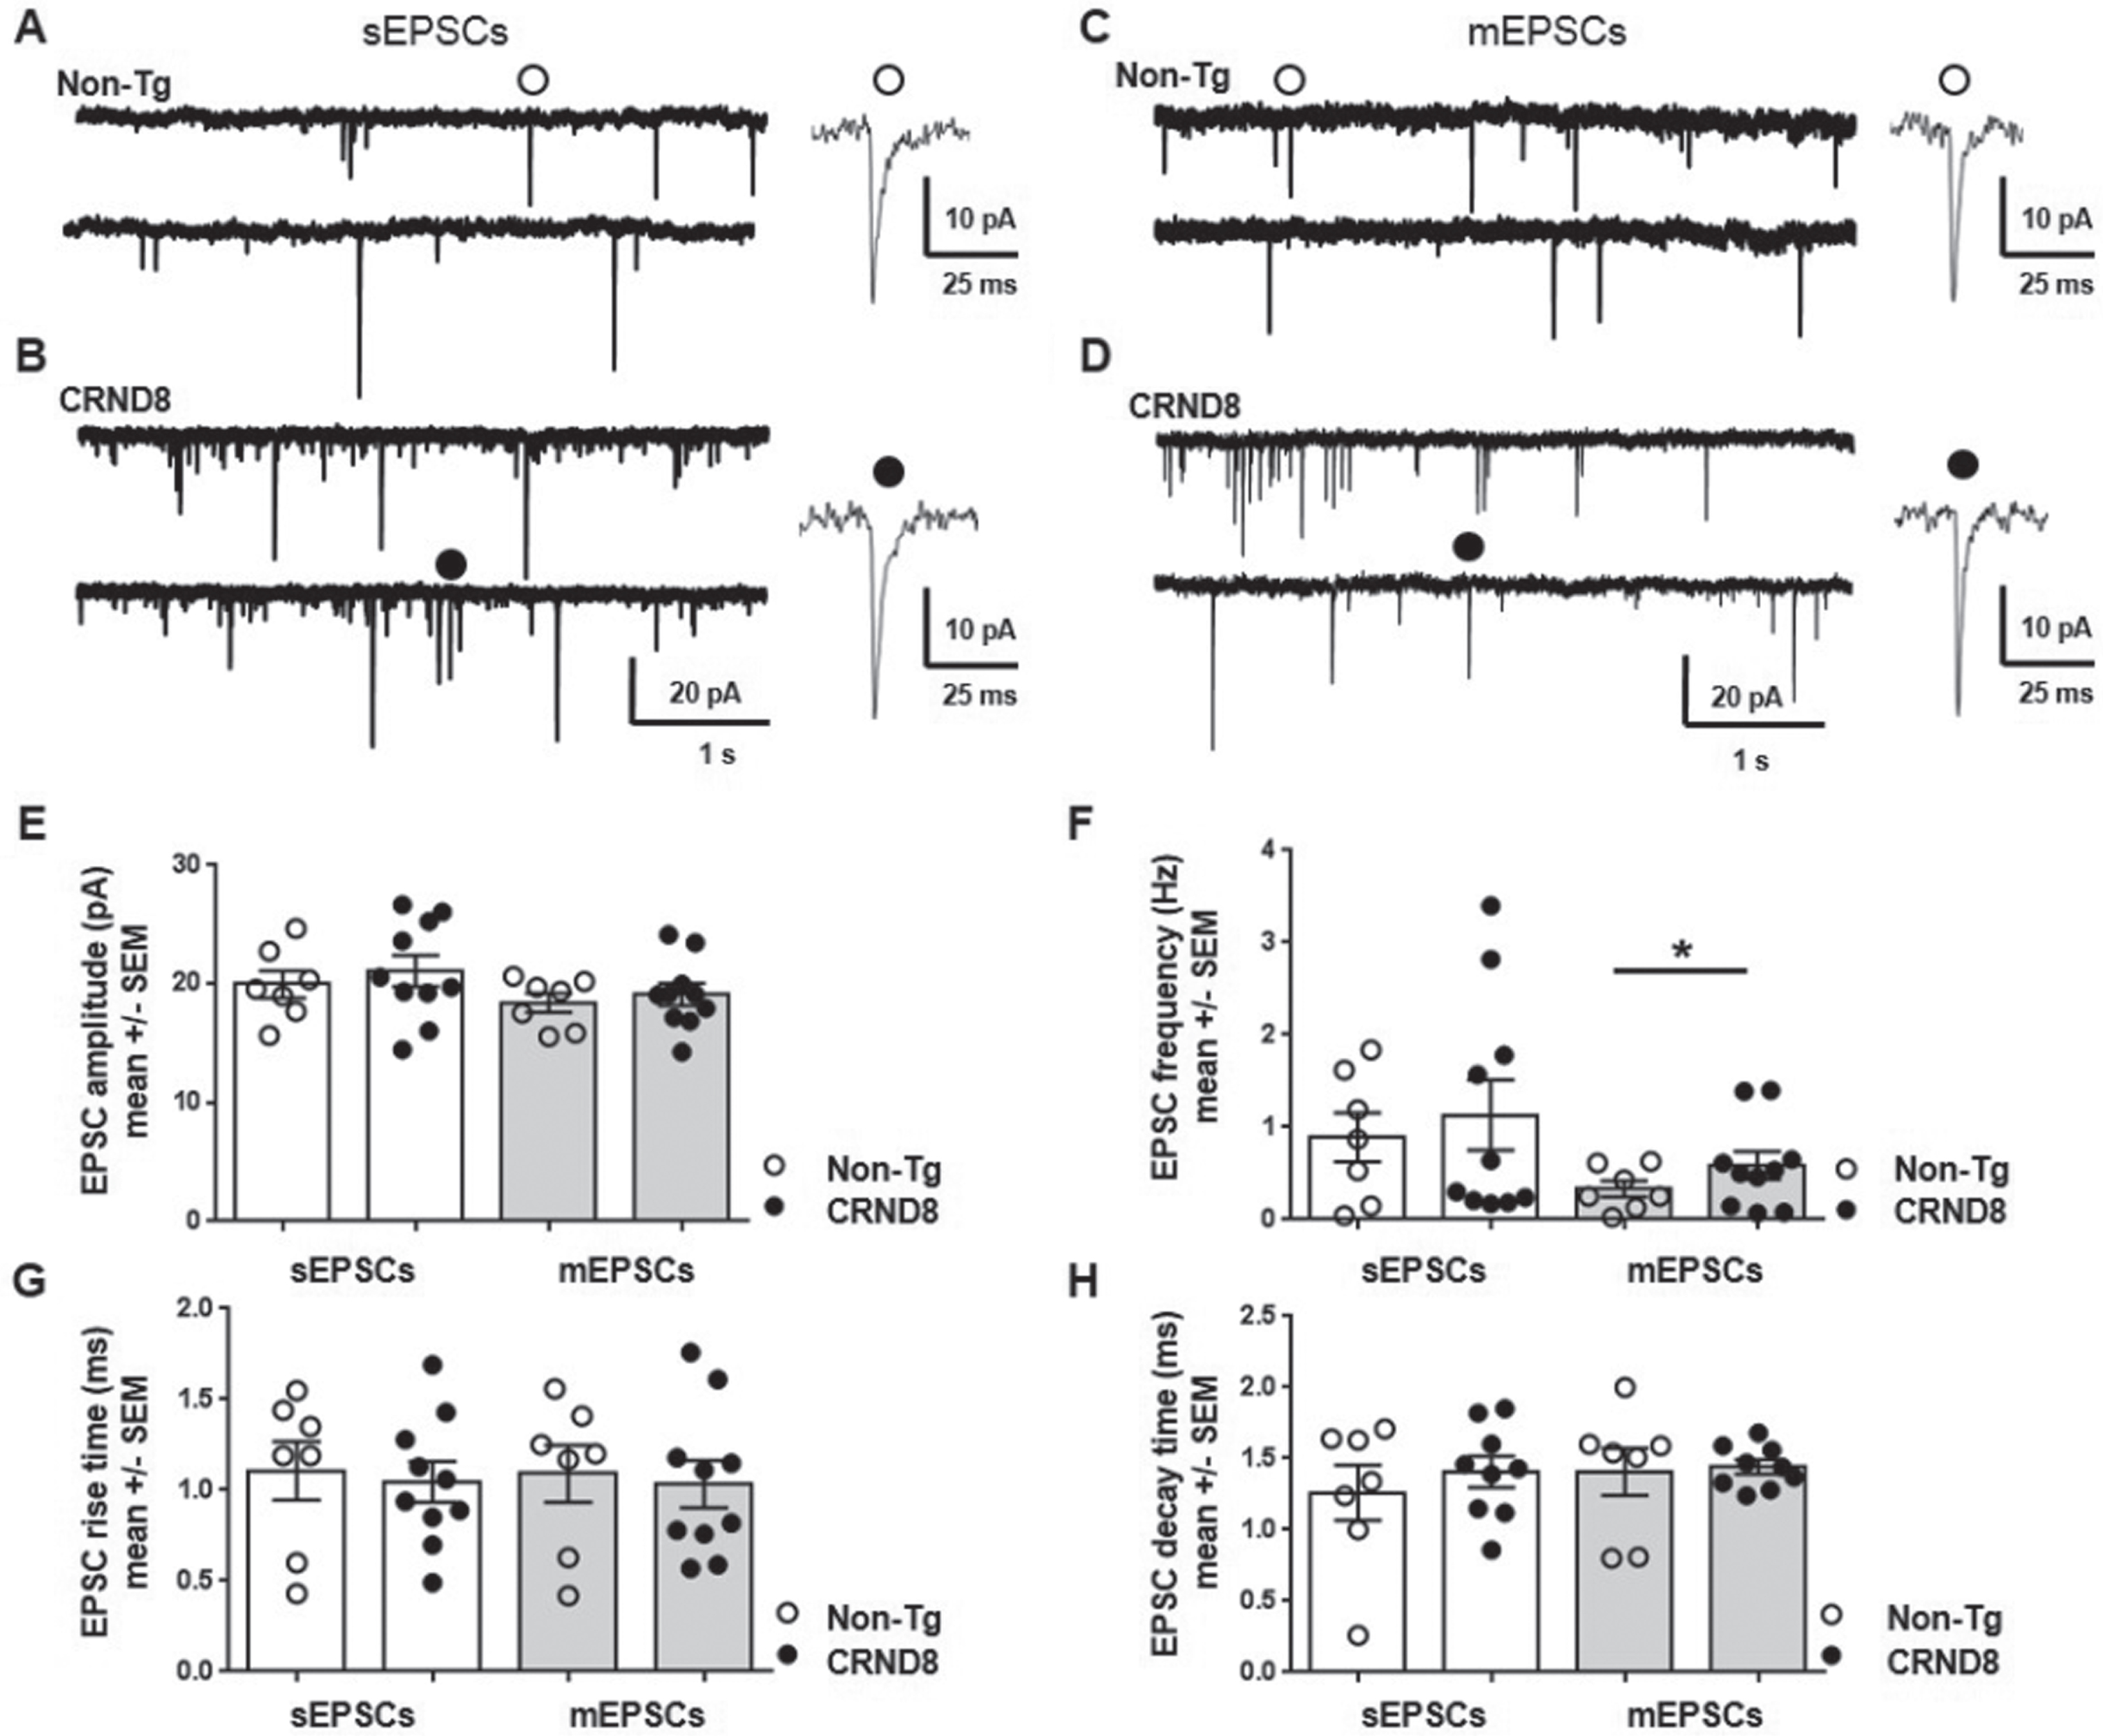 Pre-synaptic enhancement of AMPA receptor-mediated synaptic currents in lamina II DH neurons from CRND8 mice. AMPA receptor-mediated sEPSCs were recorded under whole cell voltage clamp from non-Tg (A) and CRND8 (B) lamina II dorsal horn (DH) spinal neurons: the amplitude (E), frequency (F), rise time (G), and decay time (H) of sEPSCs were not significantly different in non-Tg (n = 7) and CRND8 (n = 10) neurons. AMPA receptor-mediated mEPSCs were recorded from the same non-Tg (C) and CRND8 (D) neurons in the presence of TTX (0.1μM). In these conditions, mEPSC frequency (F) in CRND8 neurons was significantly enhanced with respect to non-Tg (*p = 0.08, t = 1,437 df = 13.76), whereas the amplitude (E), rise time (G), and decay time (H) of mEPSCs were not significantly different in CRND8 and non-Tg neurons. E-H) Data are represented as mean ± SEM in bar graphs showing individual values. *p < 0.05, one-tailed t test with Welch’s correction, CRND8 versus non-Tg.